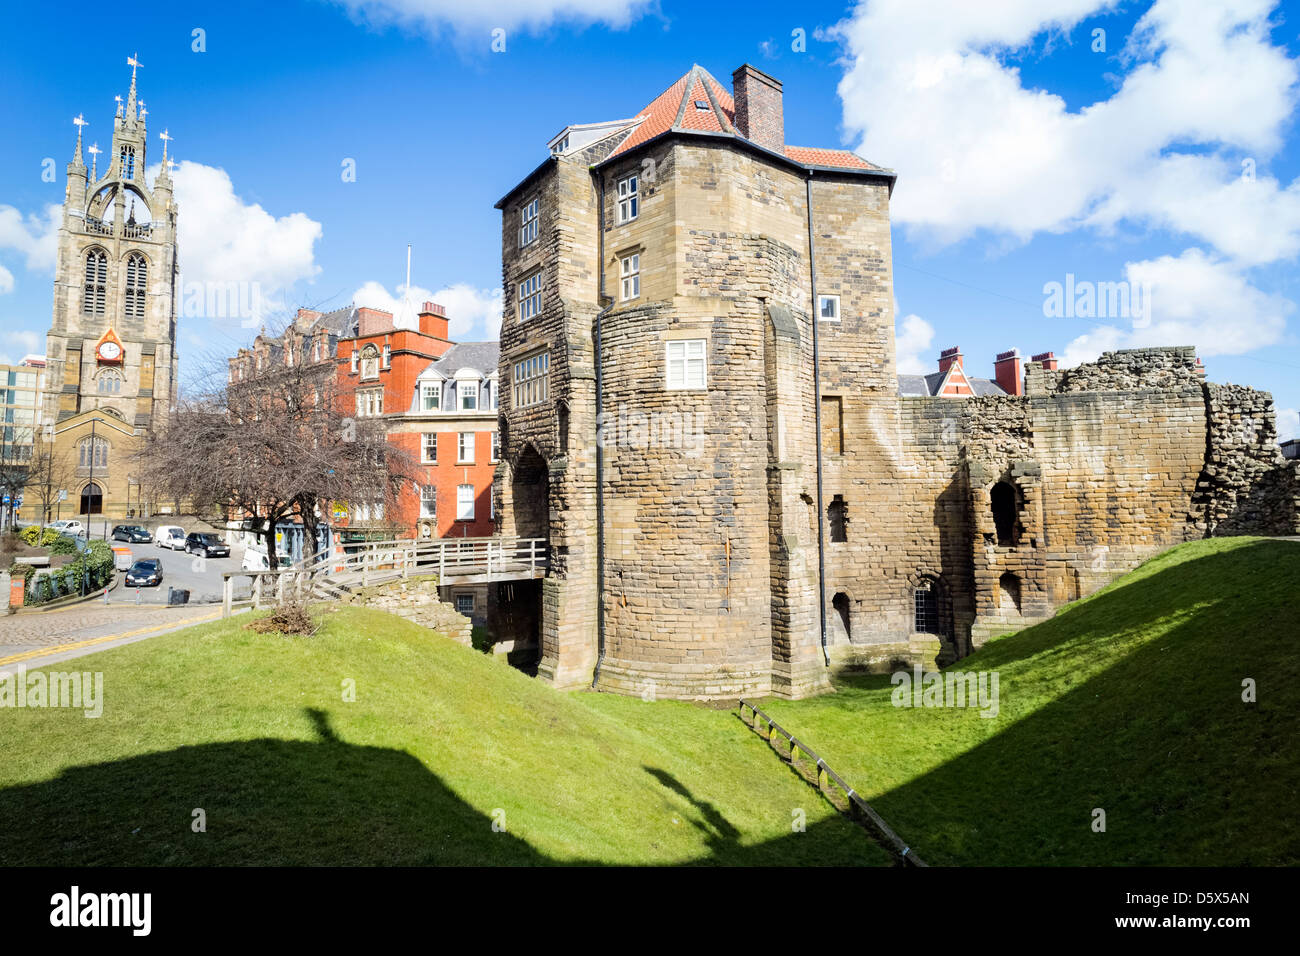 Newcastle Keep. The Castle is a medieval fortification in England, which gave the City of Newcastle its name. Stock Photo